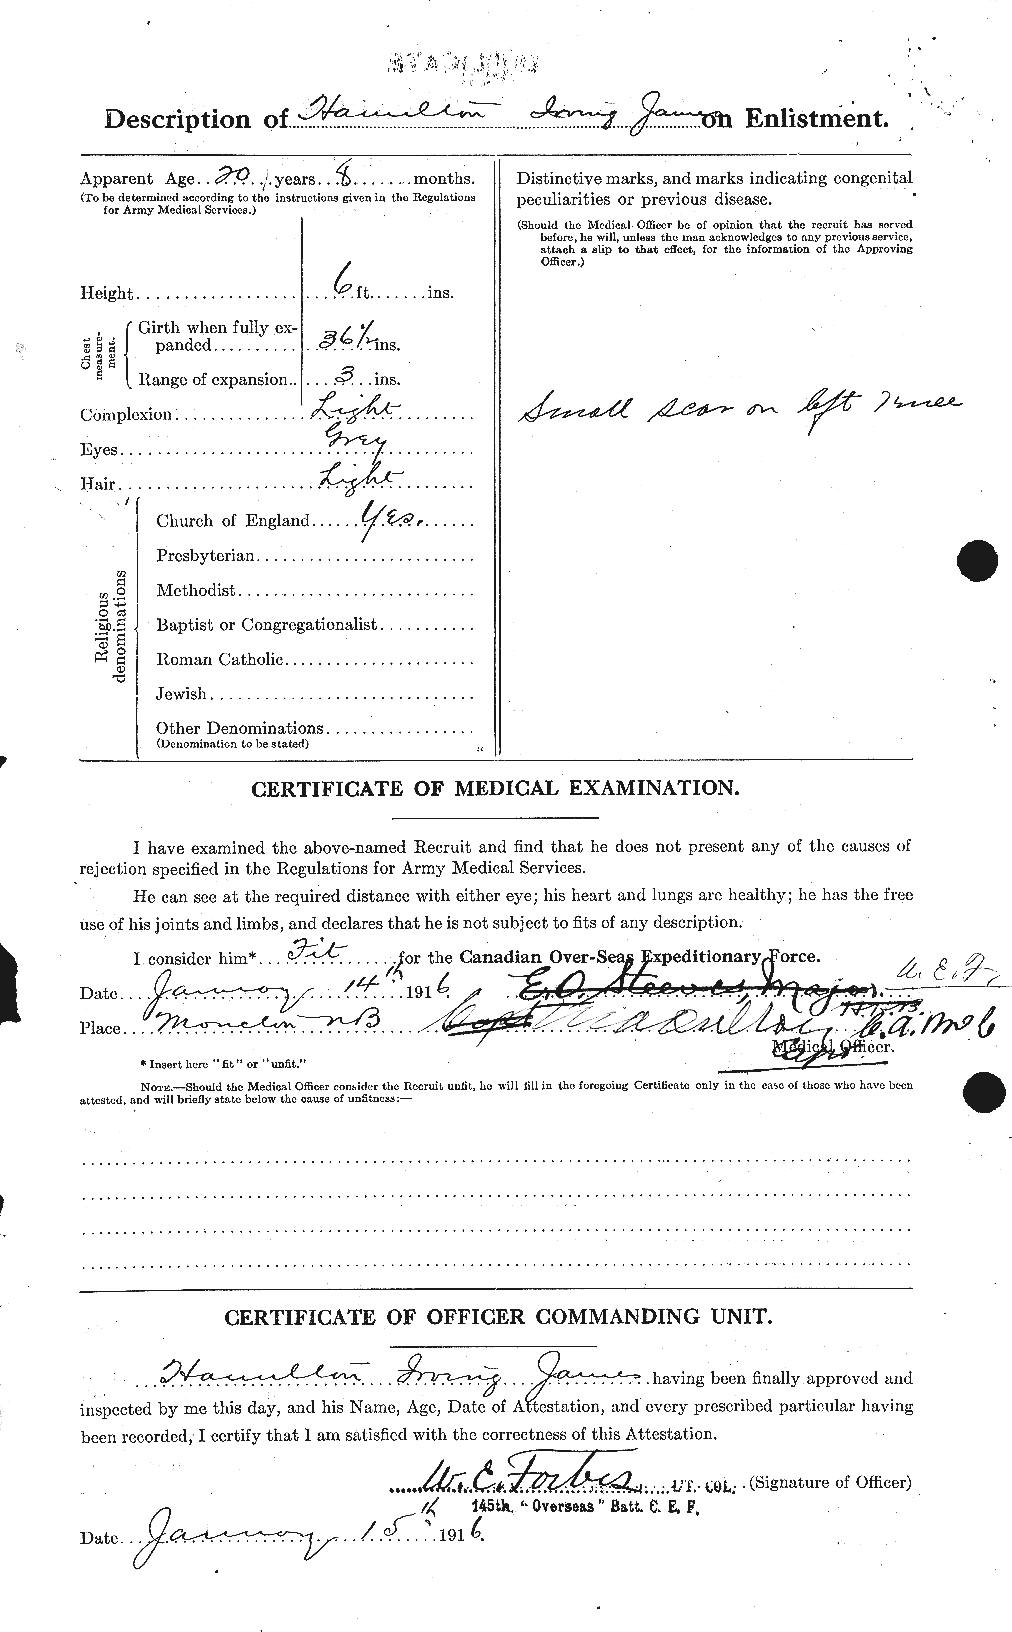 Personnel Records of the First World War - CEF 372926b